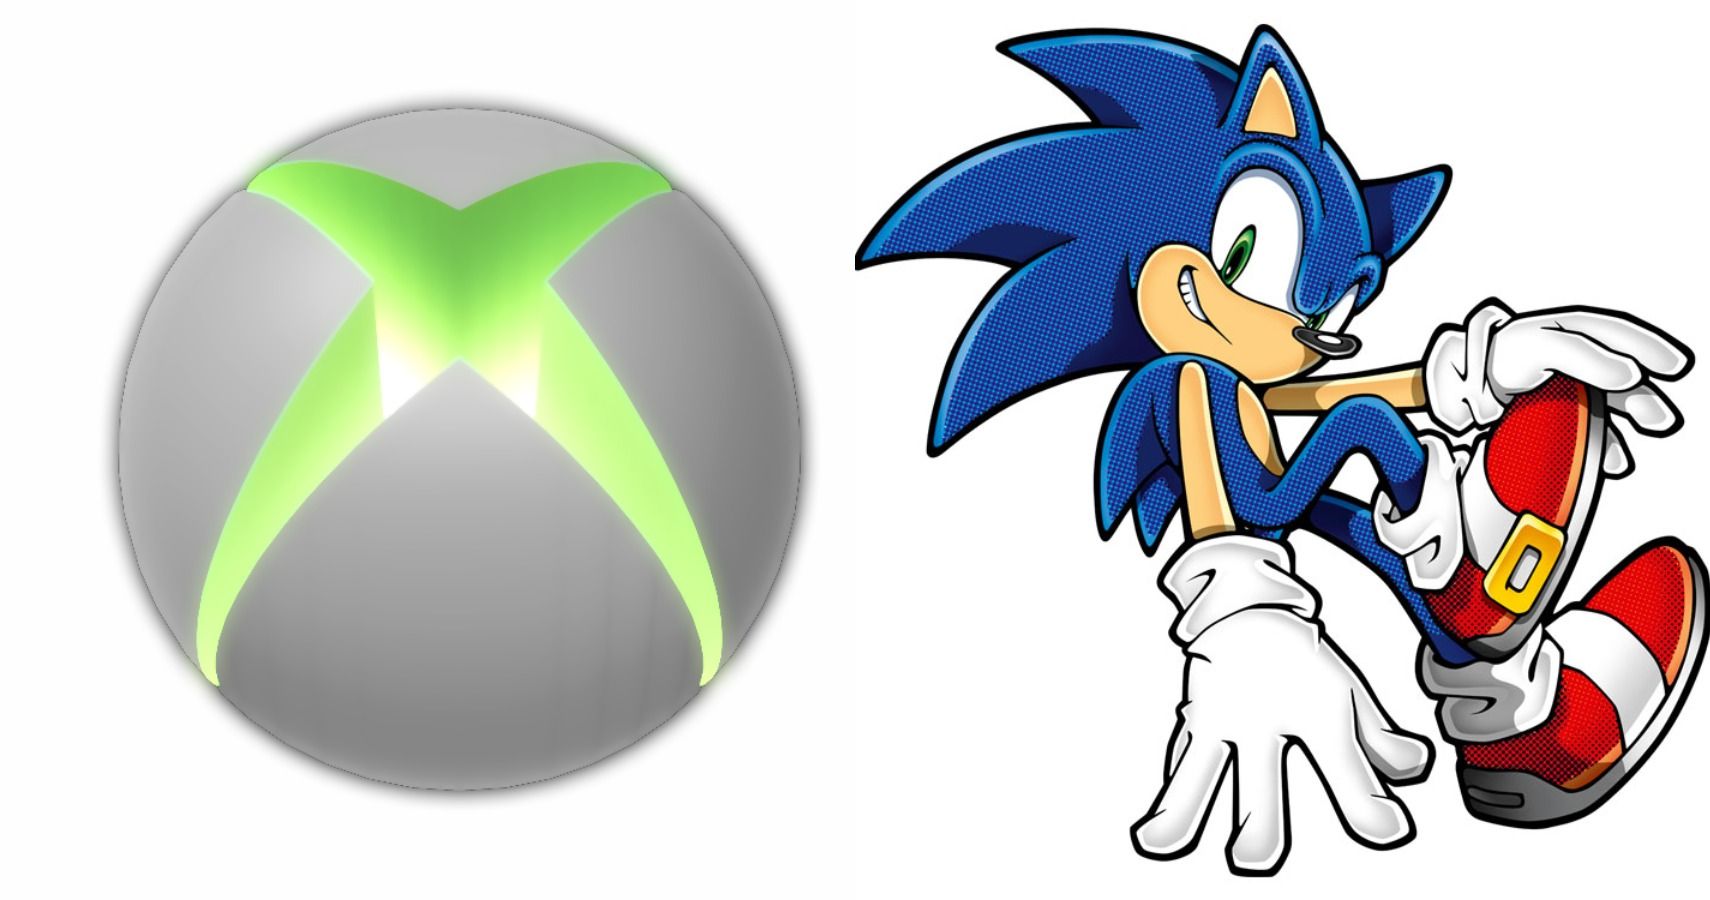 Sega & Microsoft Hold Big Meeting: Could Fans Get More Exclusives